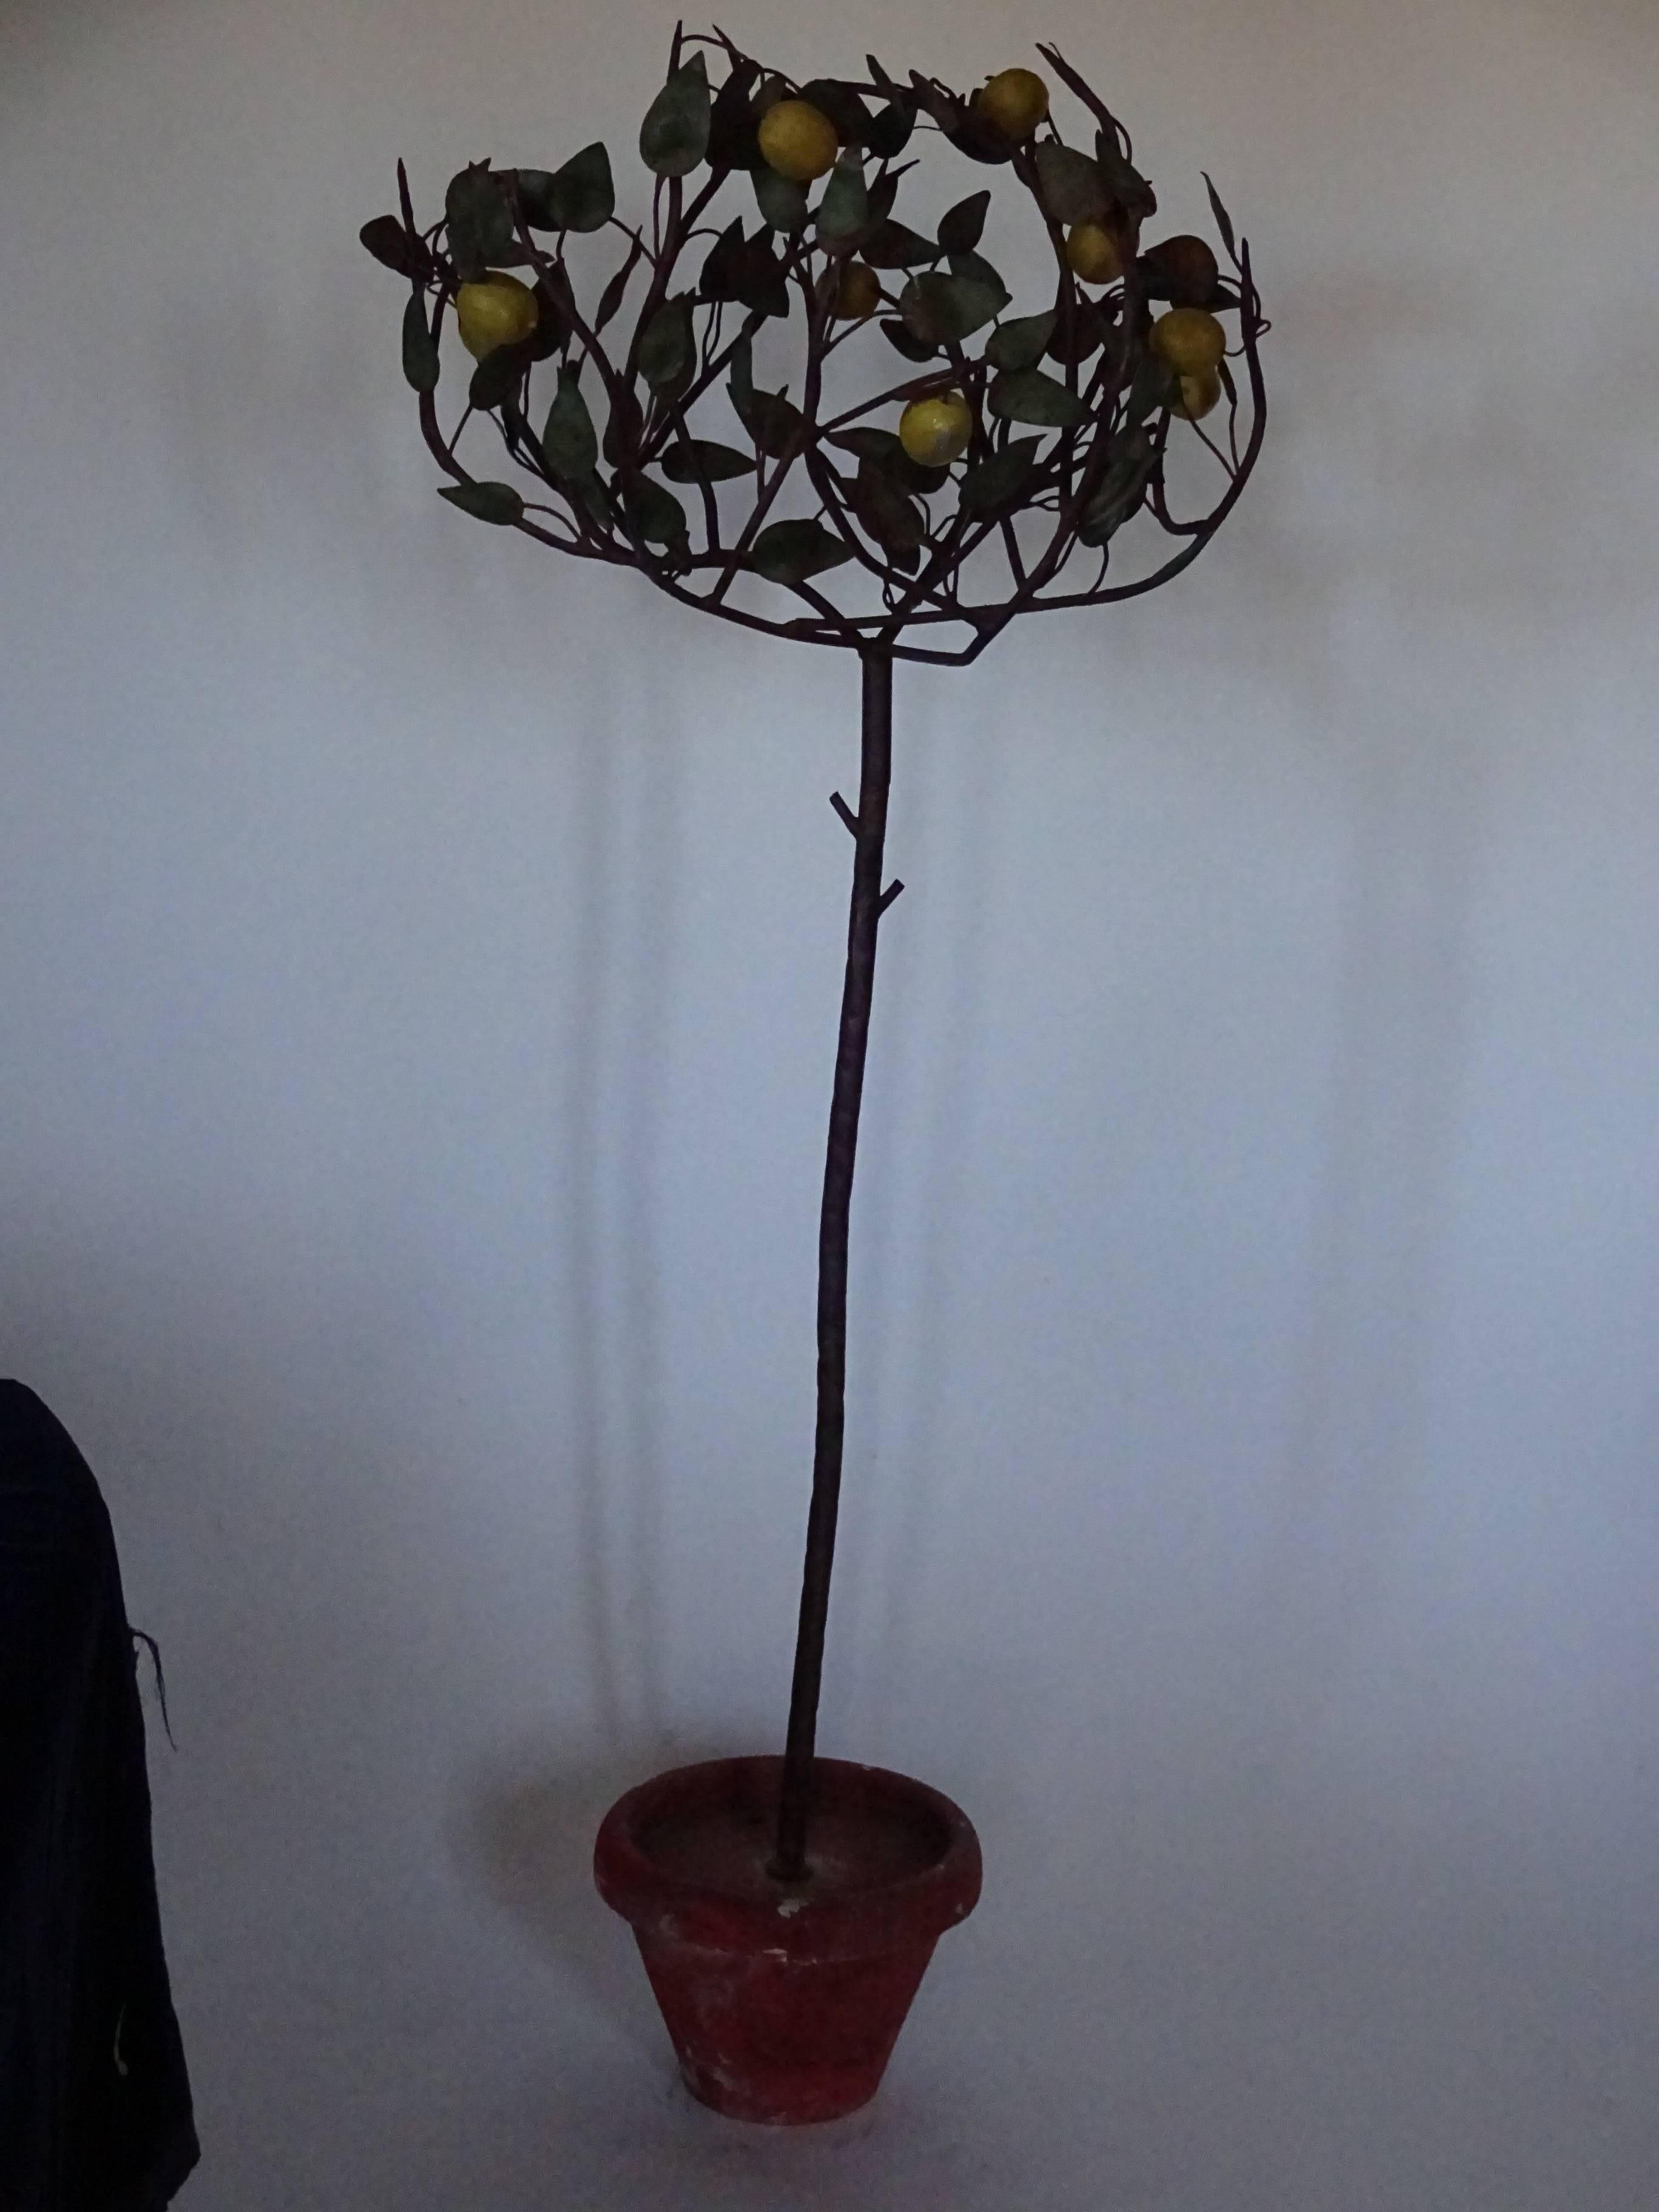 1940s Italian tole lemon tree in realistic tole terra cotta pot. Green tole
leaves and yellow lemons decorate the branches. Top of tree diameter
is approximately 26.